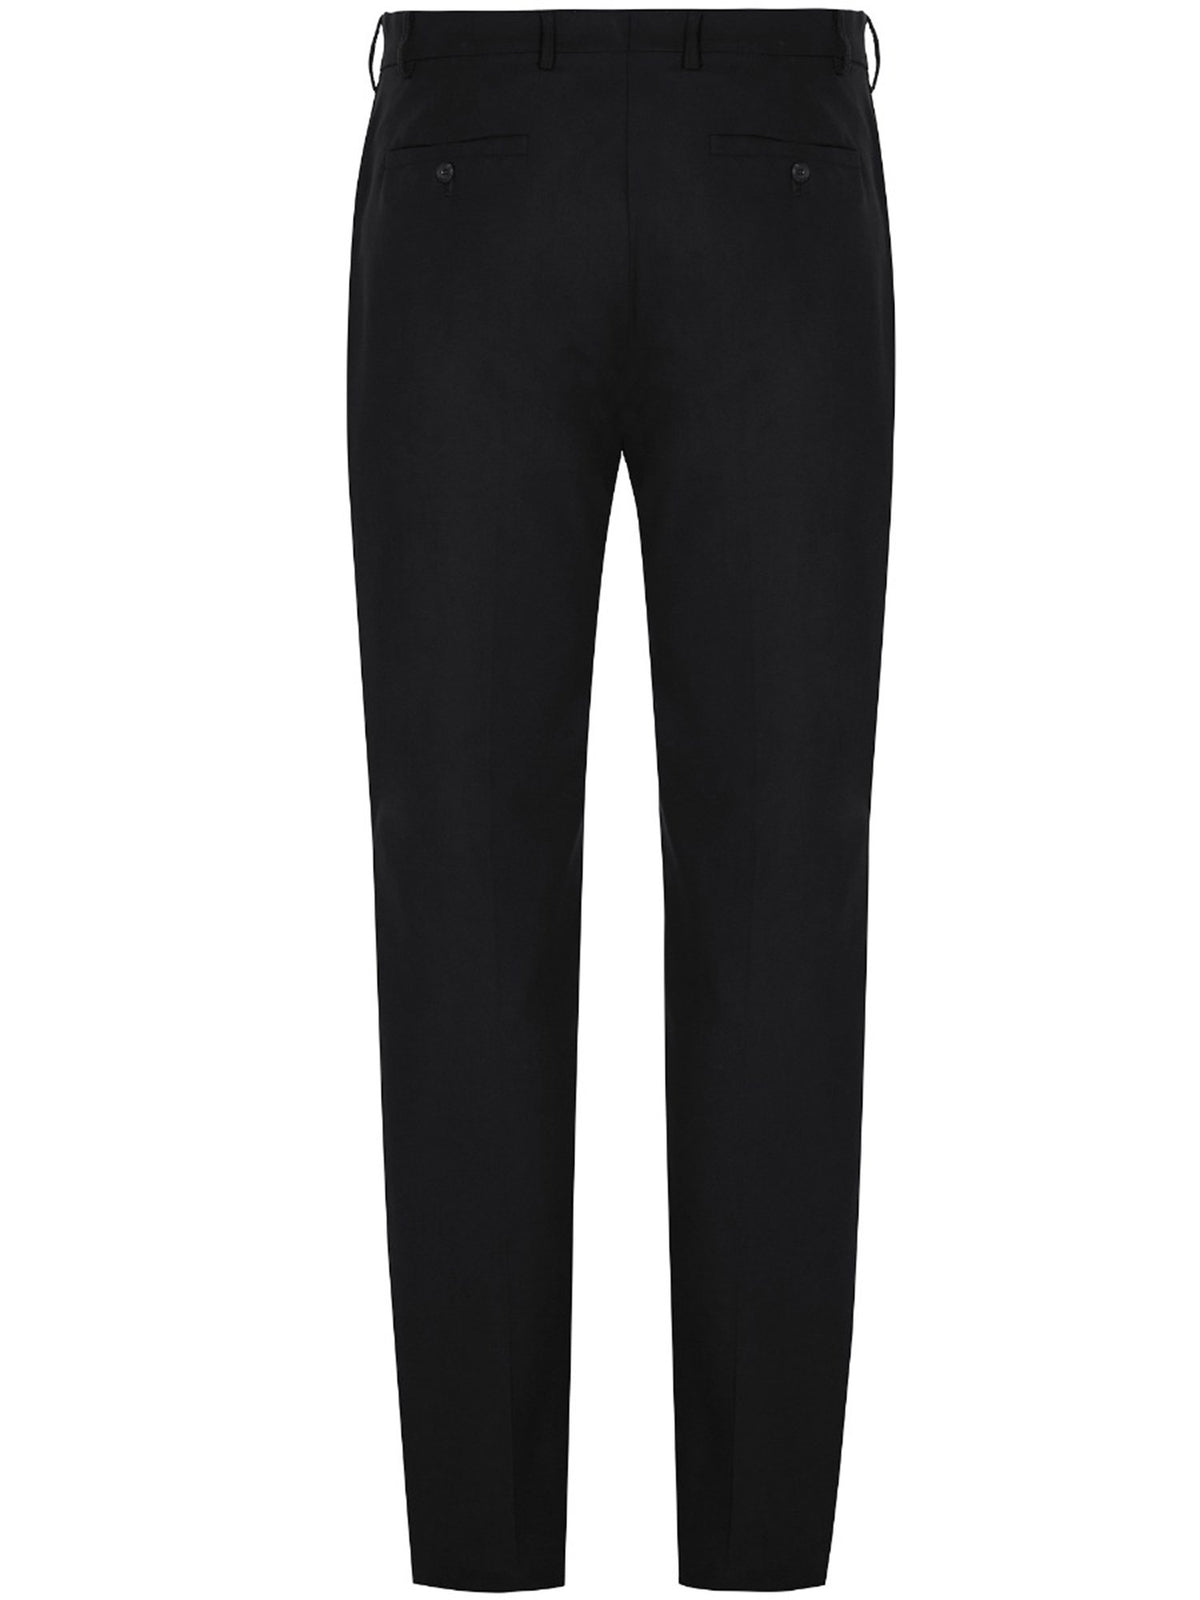 Two Piece Suit Trousers - Will's Vegan Store